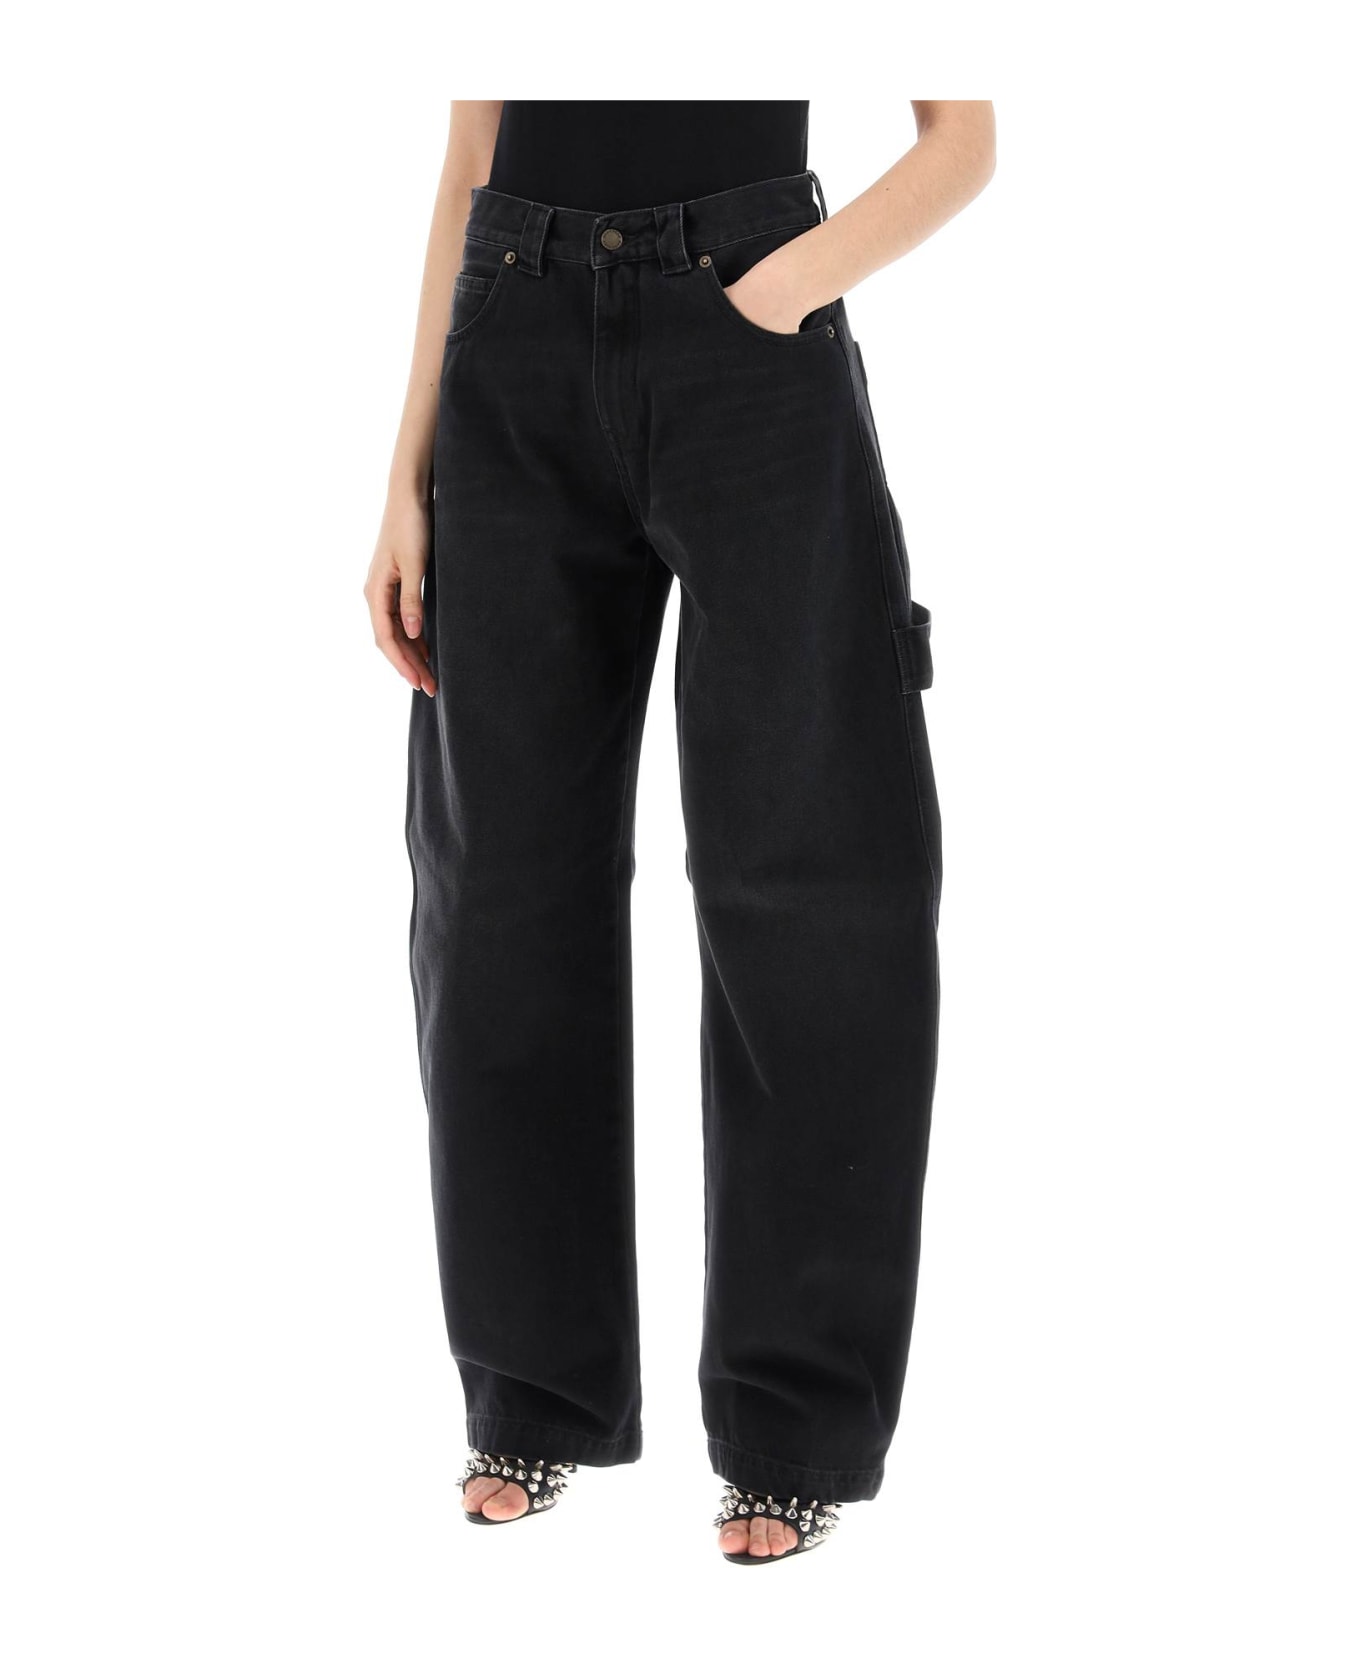 DARKPARK Audrey Cargo Jeans With Curved Leg - WASHED BLACK (Black)